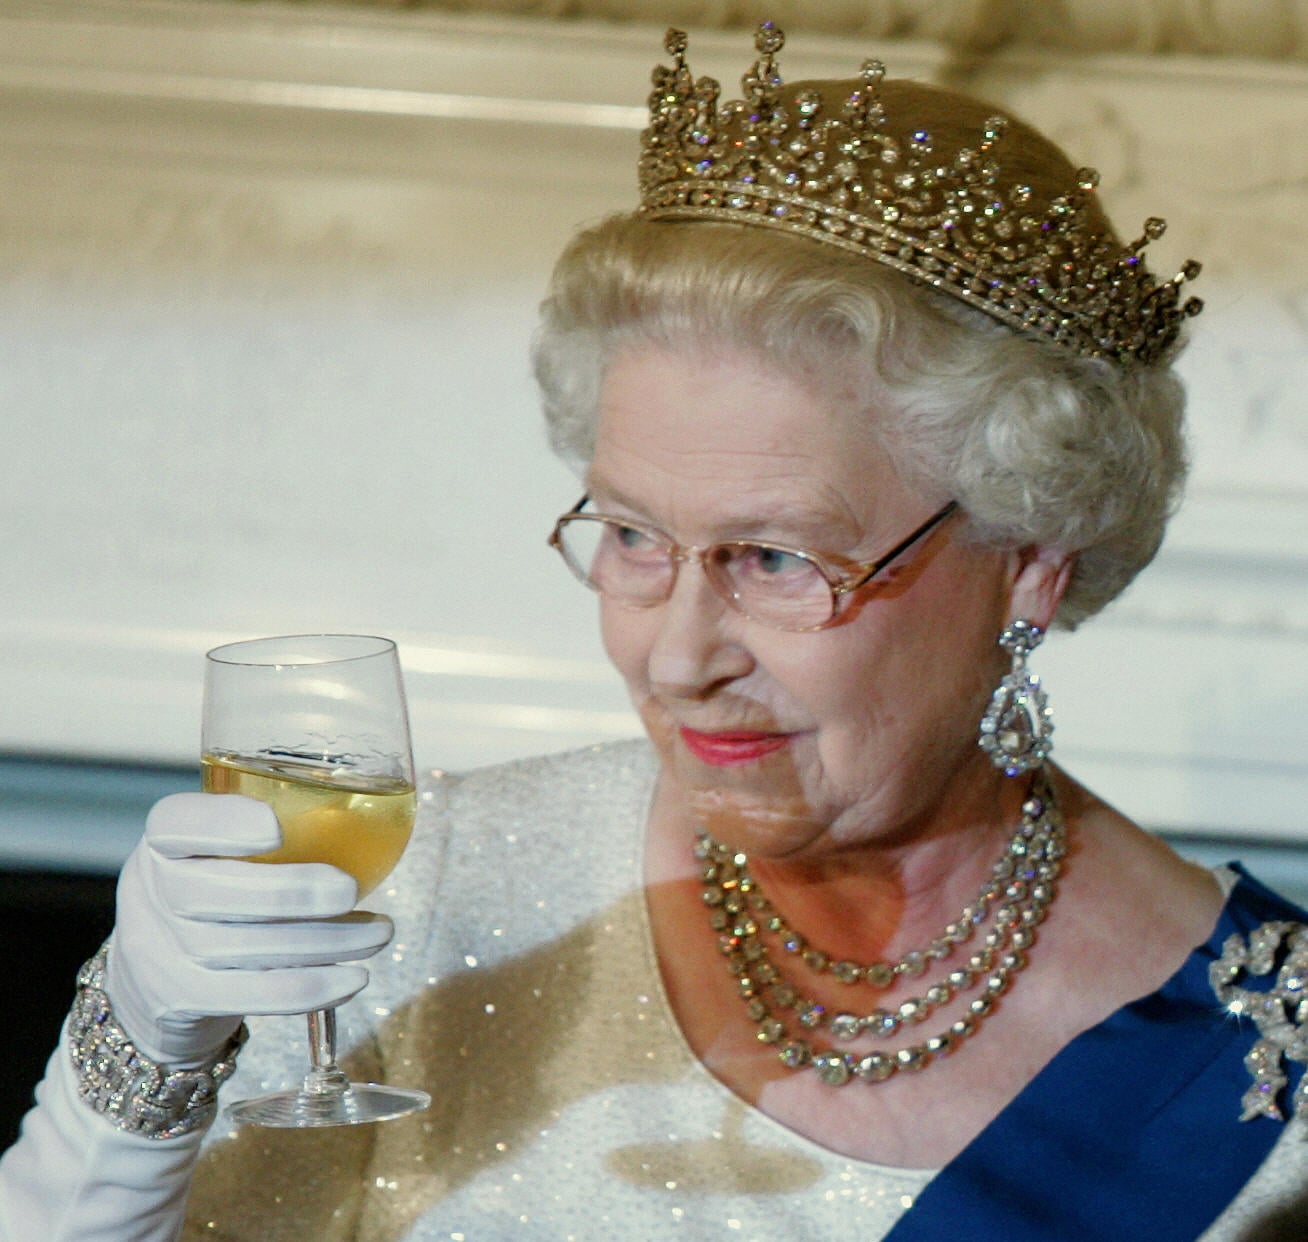 Washington, UNITED STATES: Queen Elizabeth II toasts US President George W. Bush after remarks at the start of a White House State Dinner for the British monarch and Prince Philip 07 May 2007 in Washington, DC. The queen last visited the United States in 1991 when Bush's father was president.    AFP Photo/Saul Loeb (Photo credit should read SAUL LOEB/AFP/Getty Images)